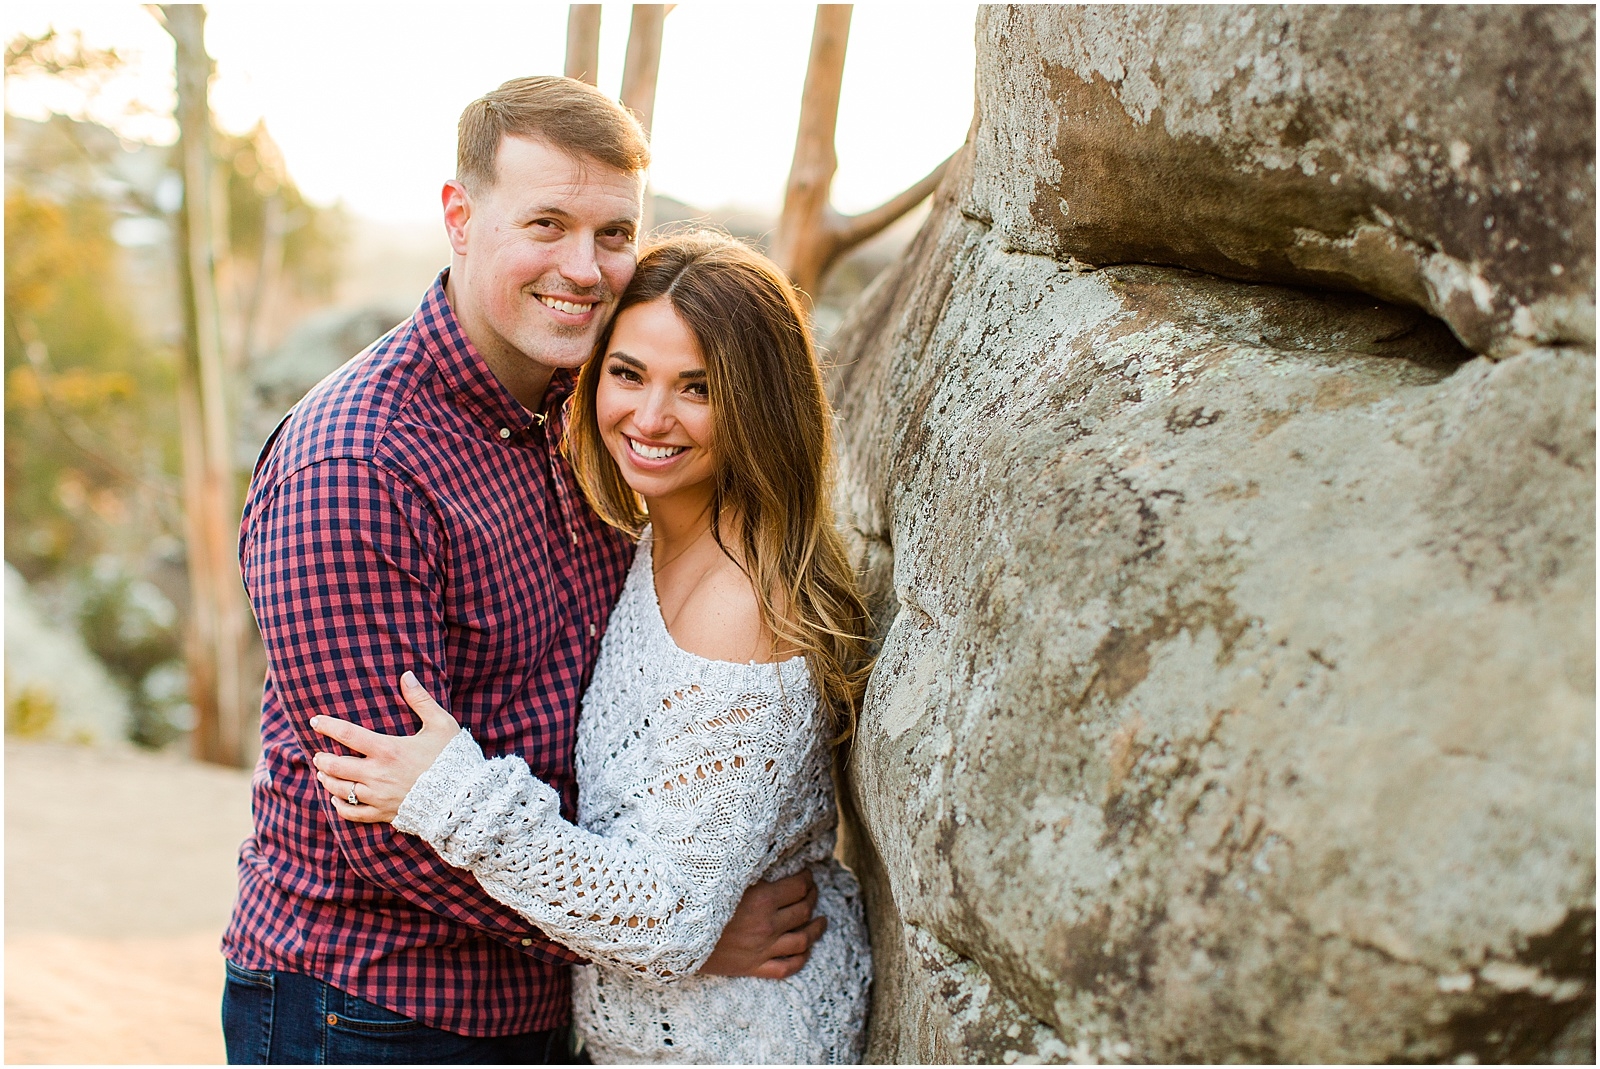 A Sunny Garden of the Gods Engagement Session | Shiloh and Lee | Bret and Brandie Photography070.jpg